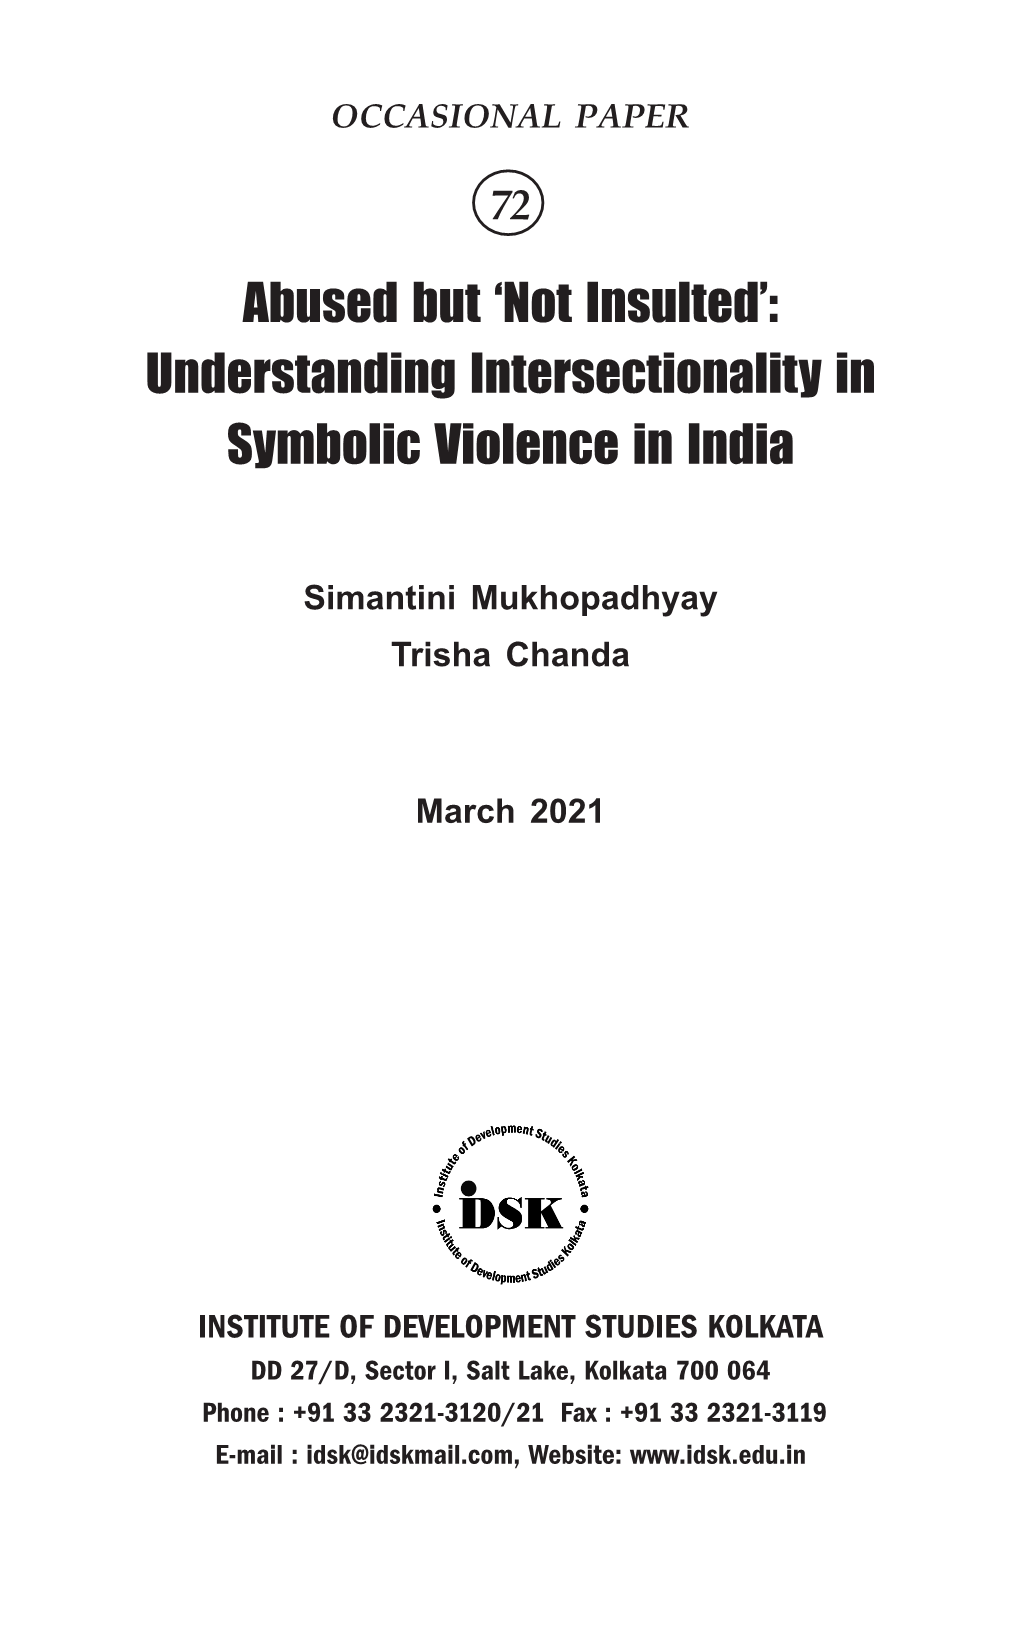 Abused but ‘Not Insulted’: Understanding Intersectionality in Symbolic Violence in India